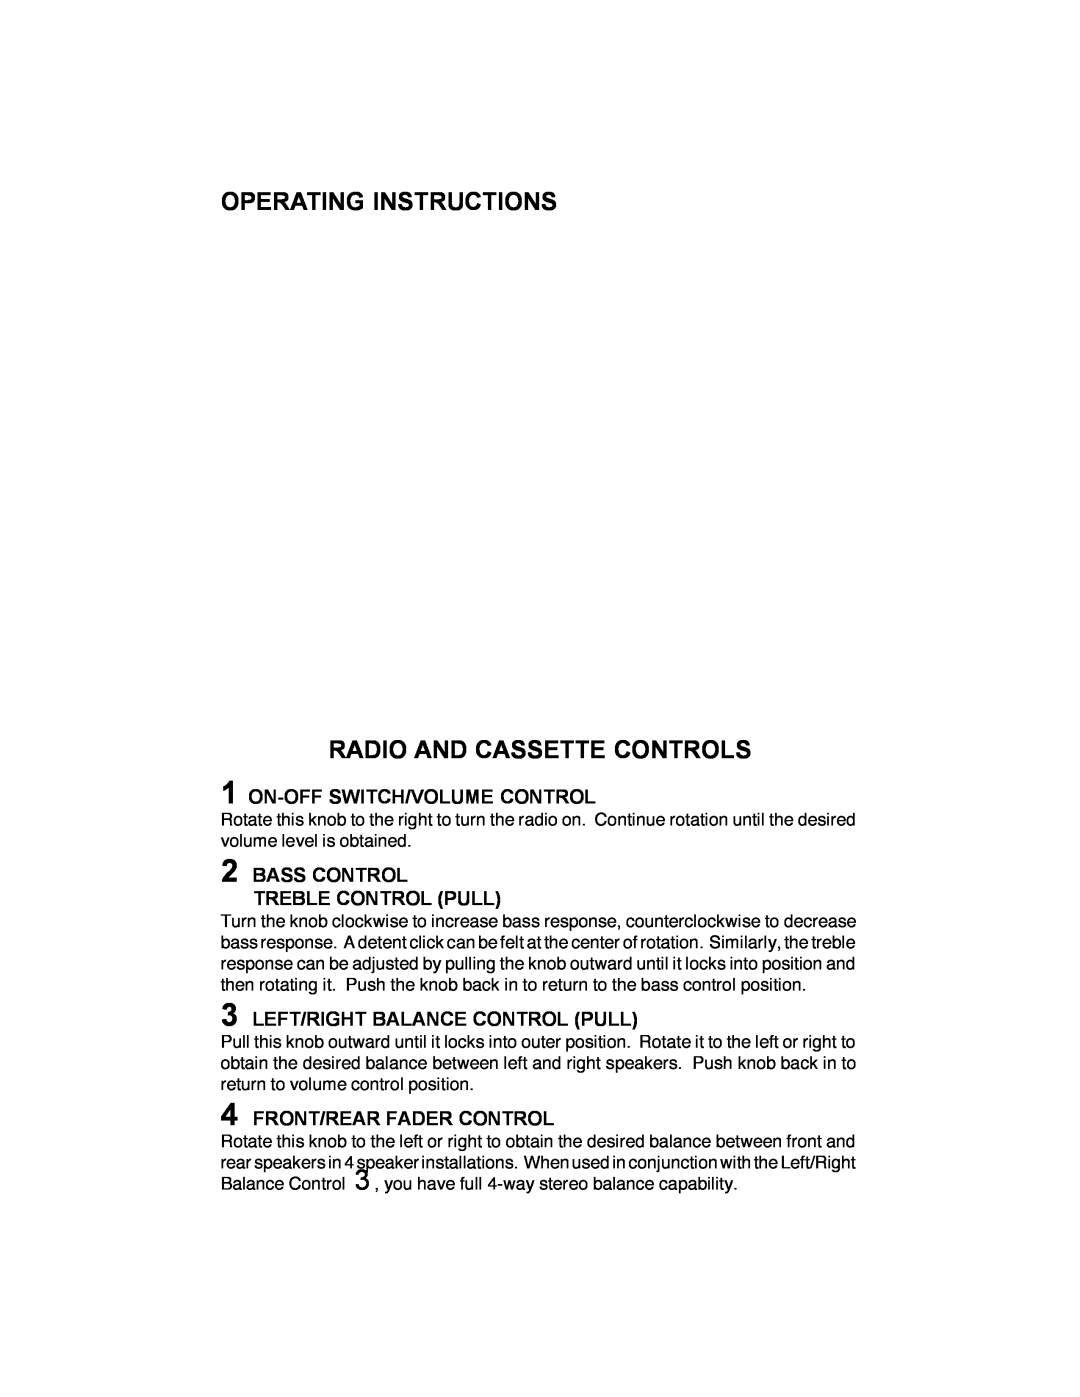 Audiovox IM-500 owner manual Operating Instructions, Radio And Cassette Controls, 1ON-OFFSWITCH/VOLUME CONTROL 